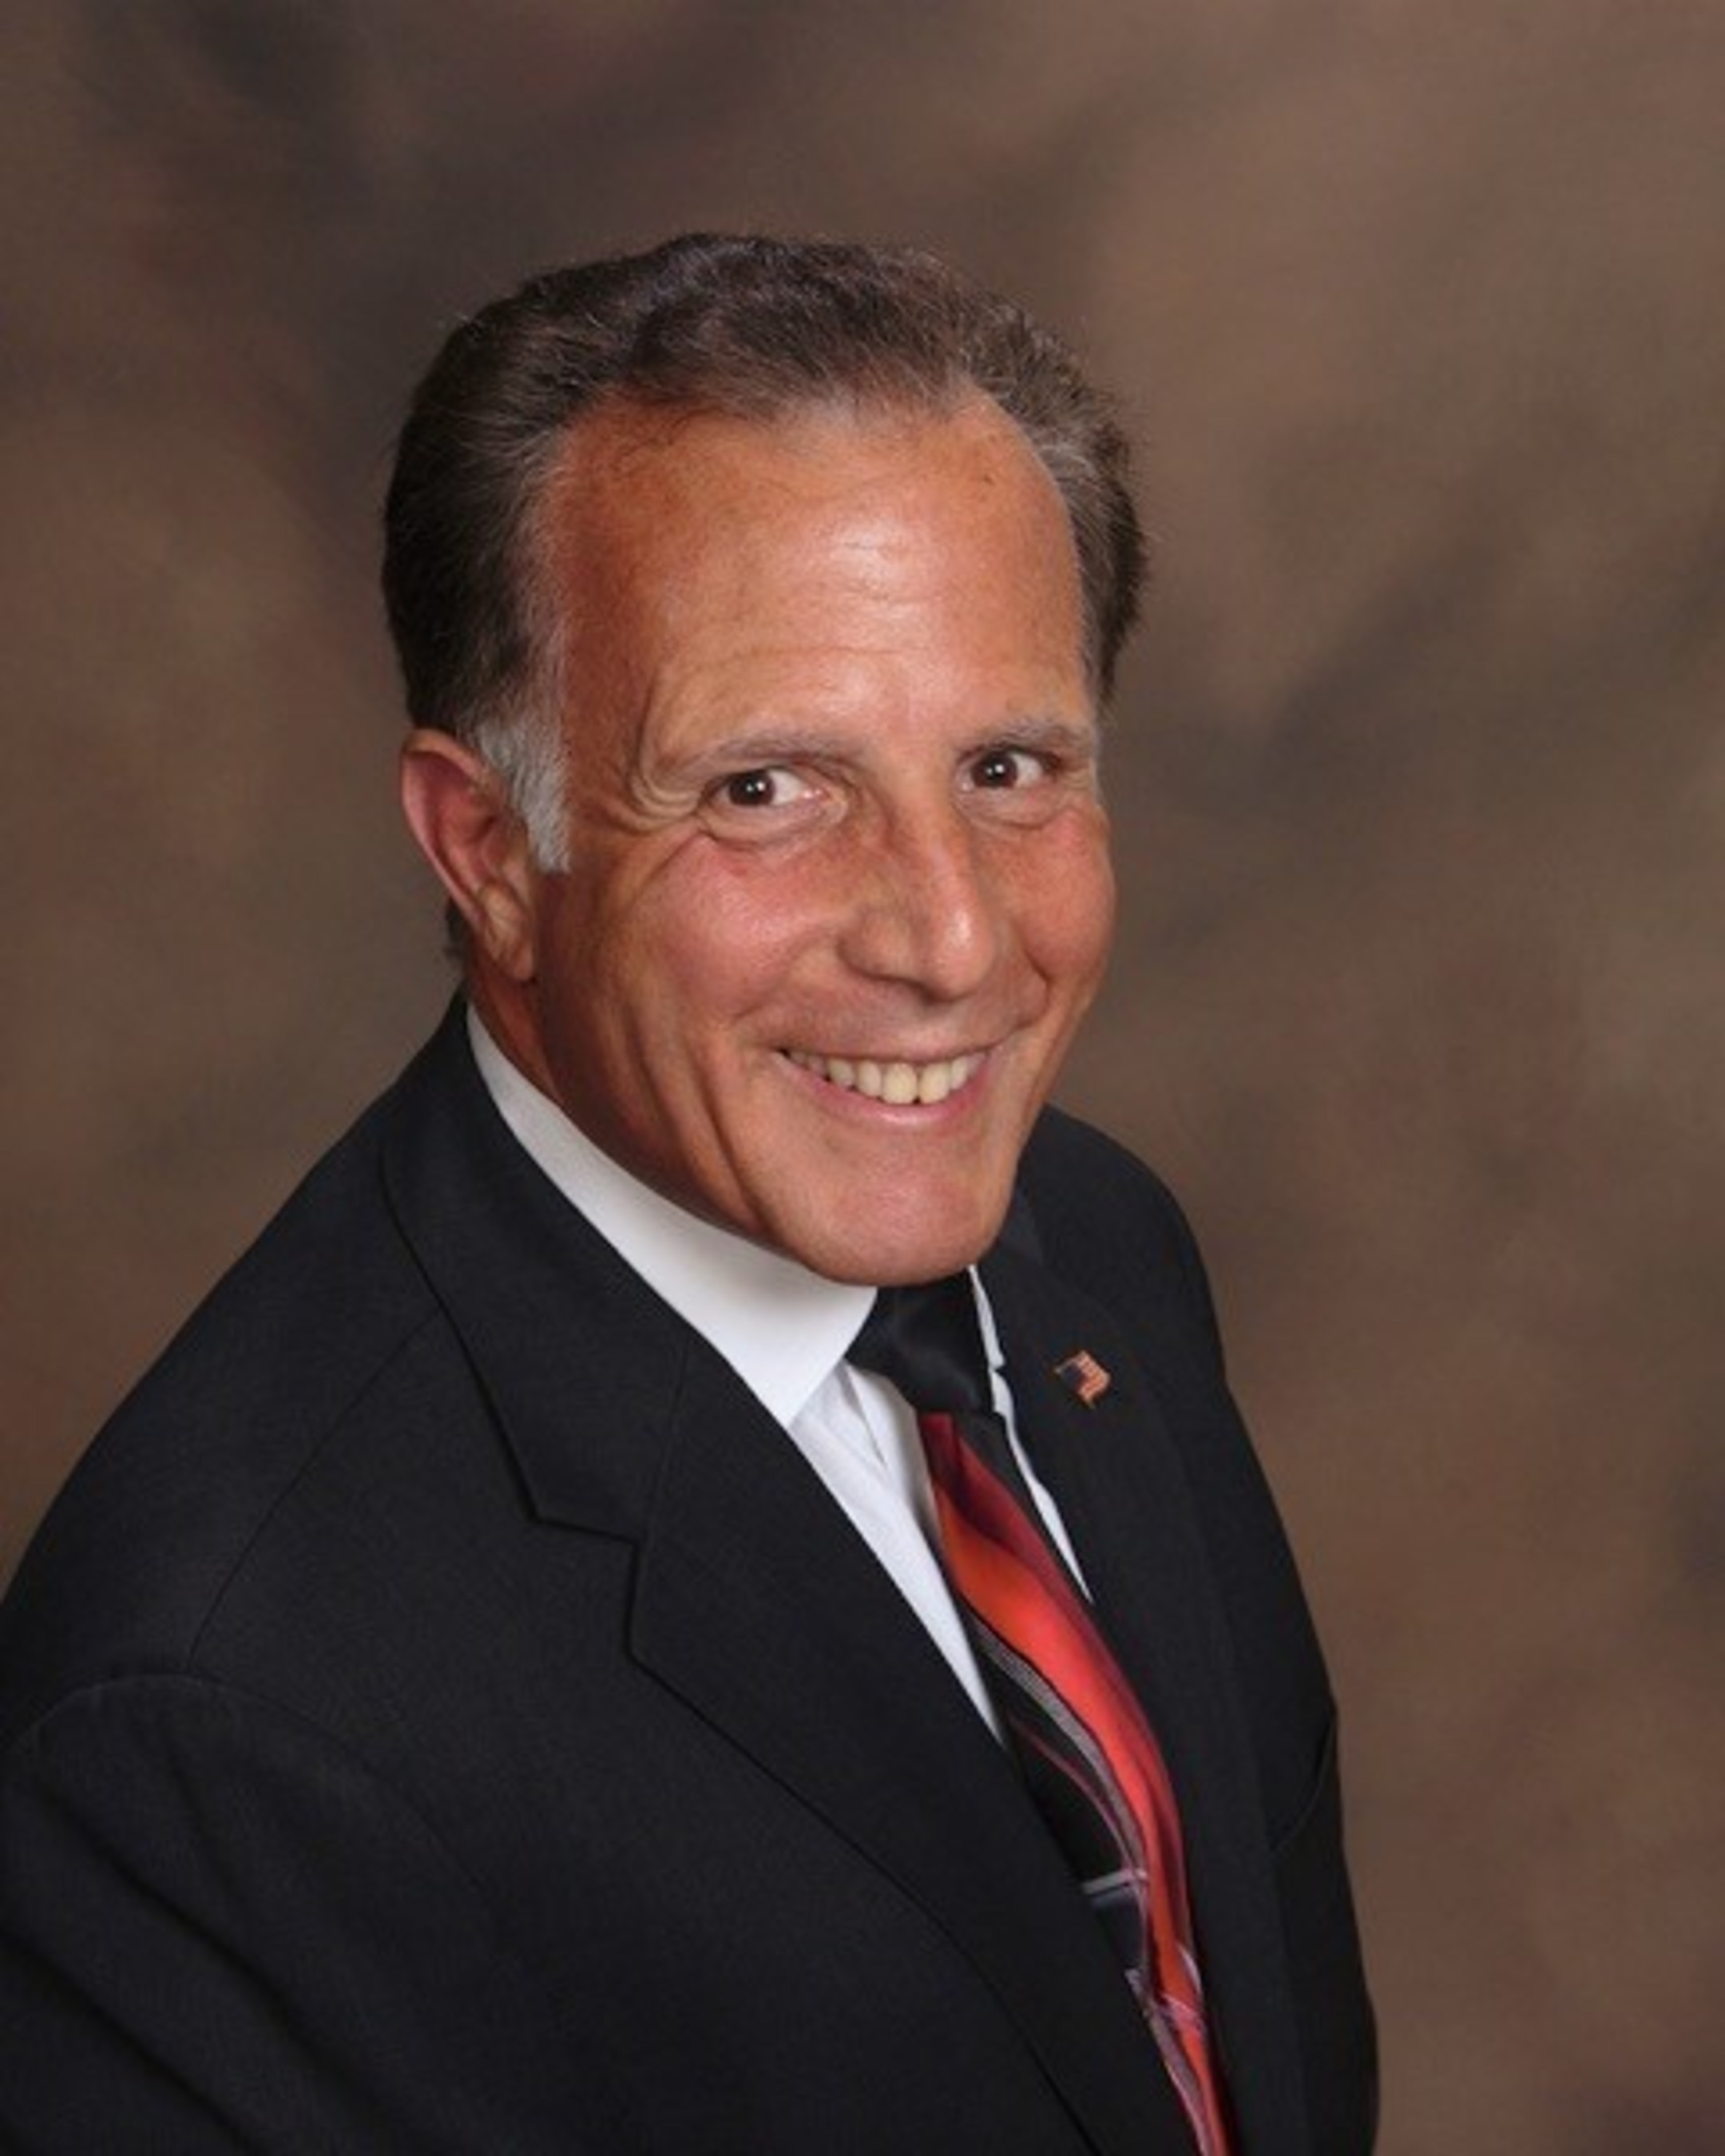 Art Saitta, Assistant Vice President and Residential Business Officer at Ridgewood Savings Bank